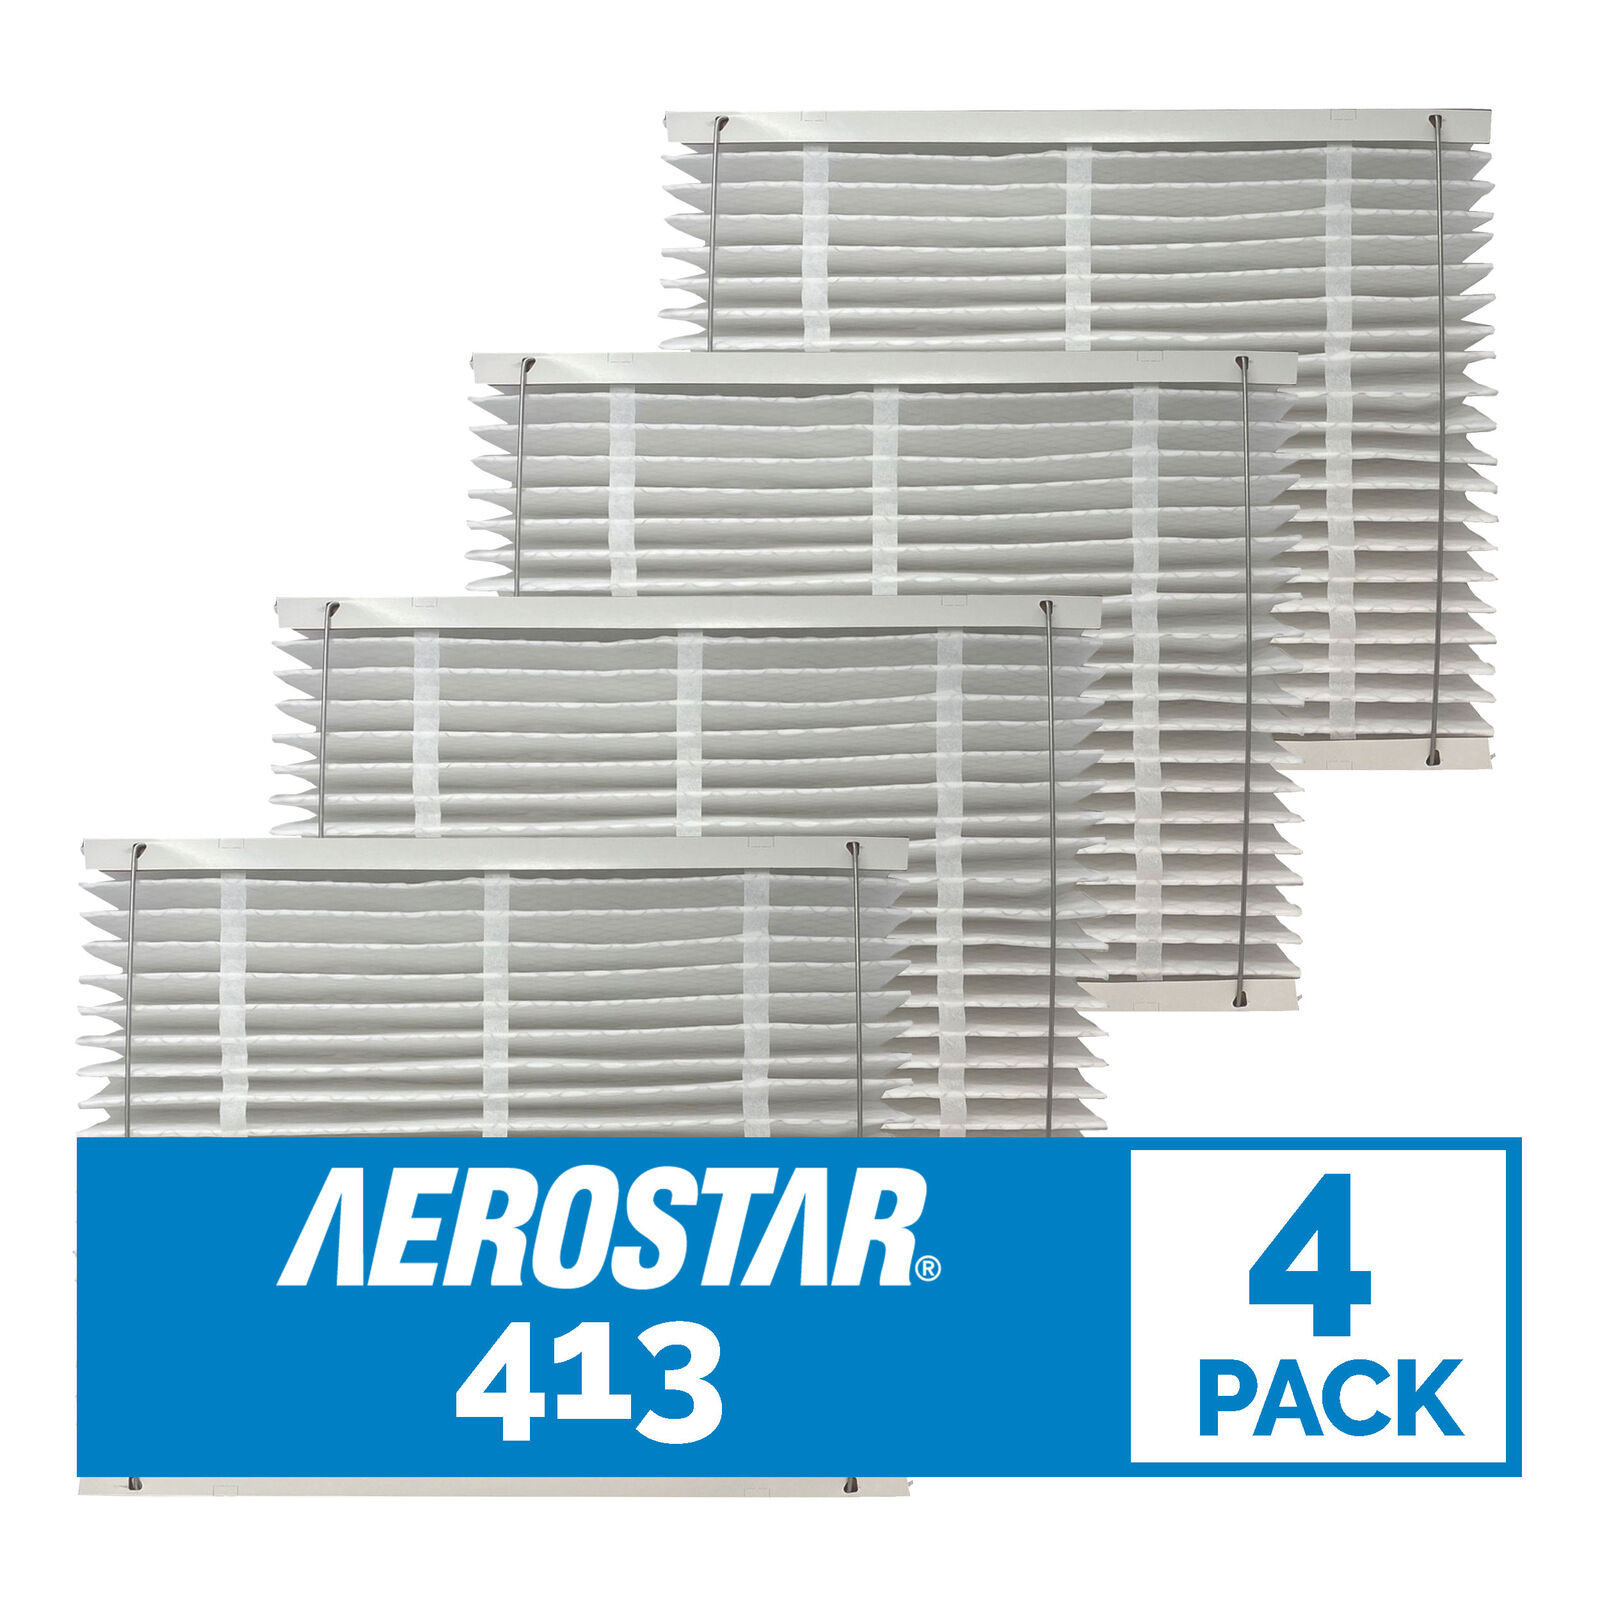 Aerostar MERV 13 Collapsible Replacement Filter for Aprilaire 413, 4PK